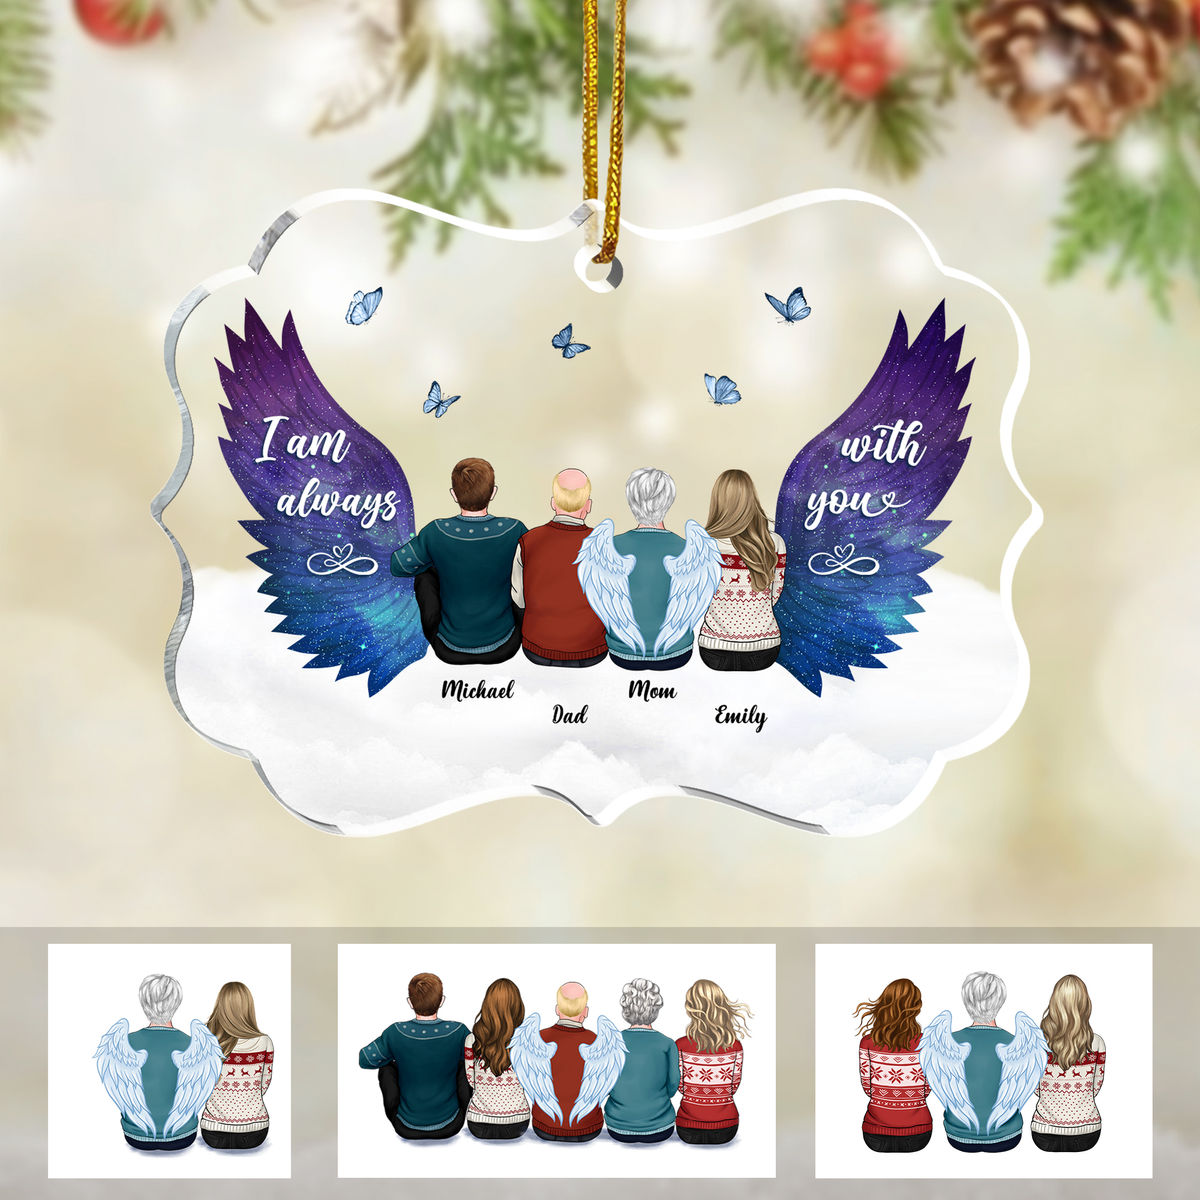 Personalized Ornament - Transparent Christmas Ornament - Heaven - I am always with you (Custom Acrylic Medallion Ornament)